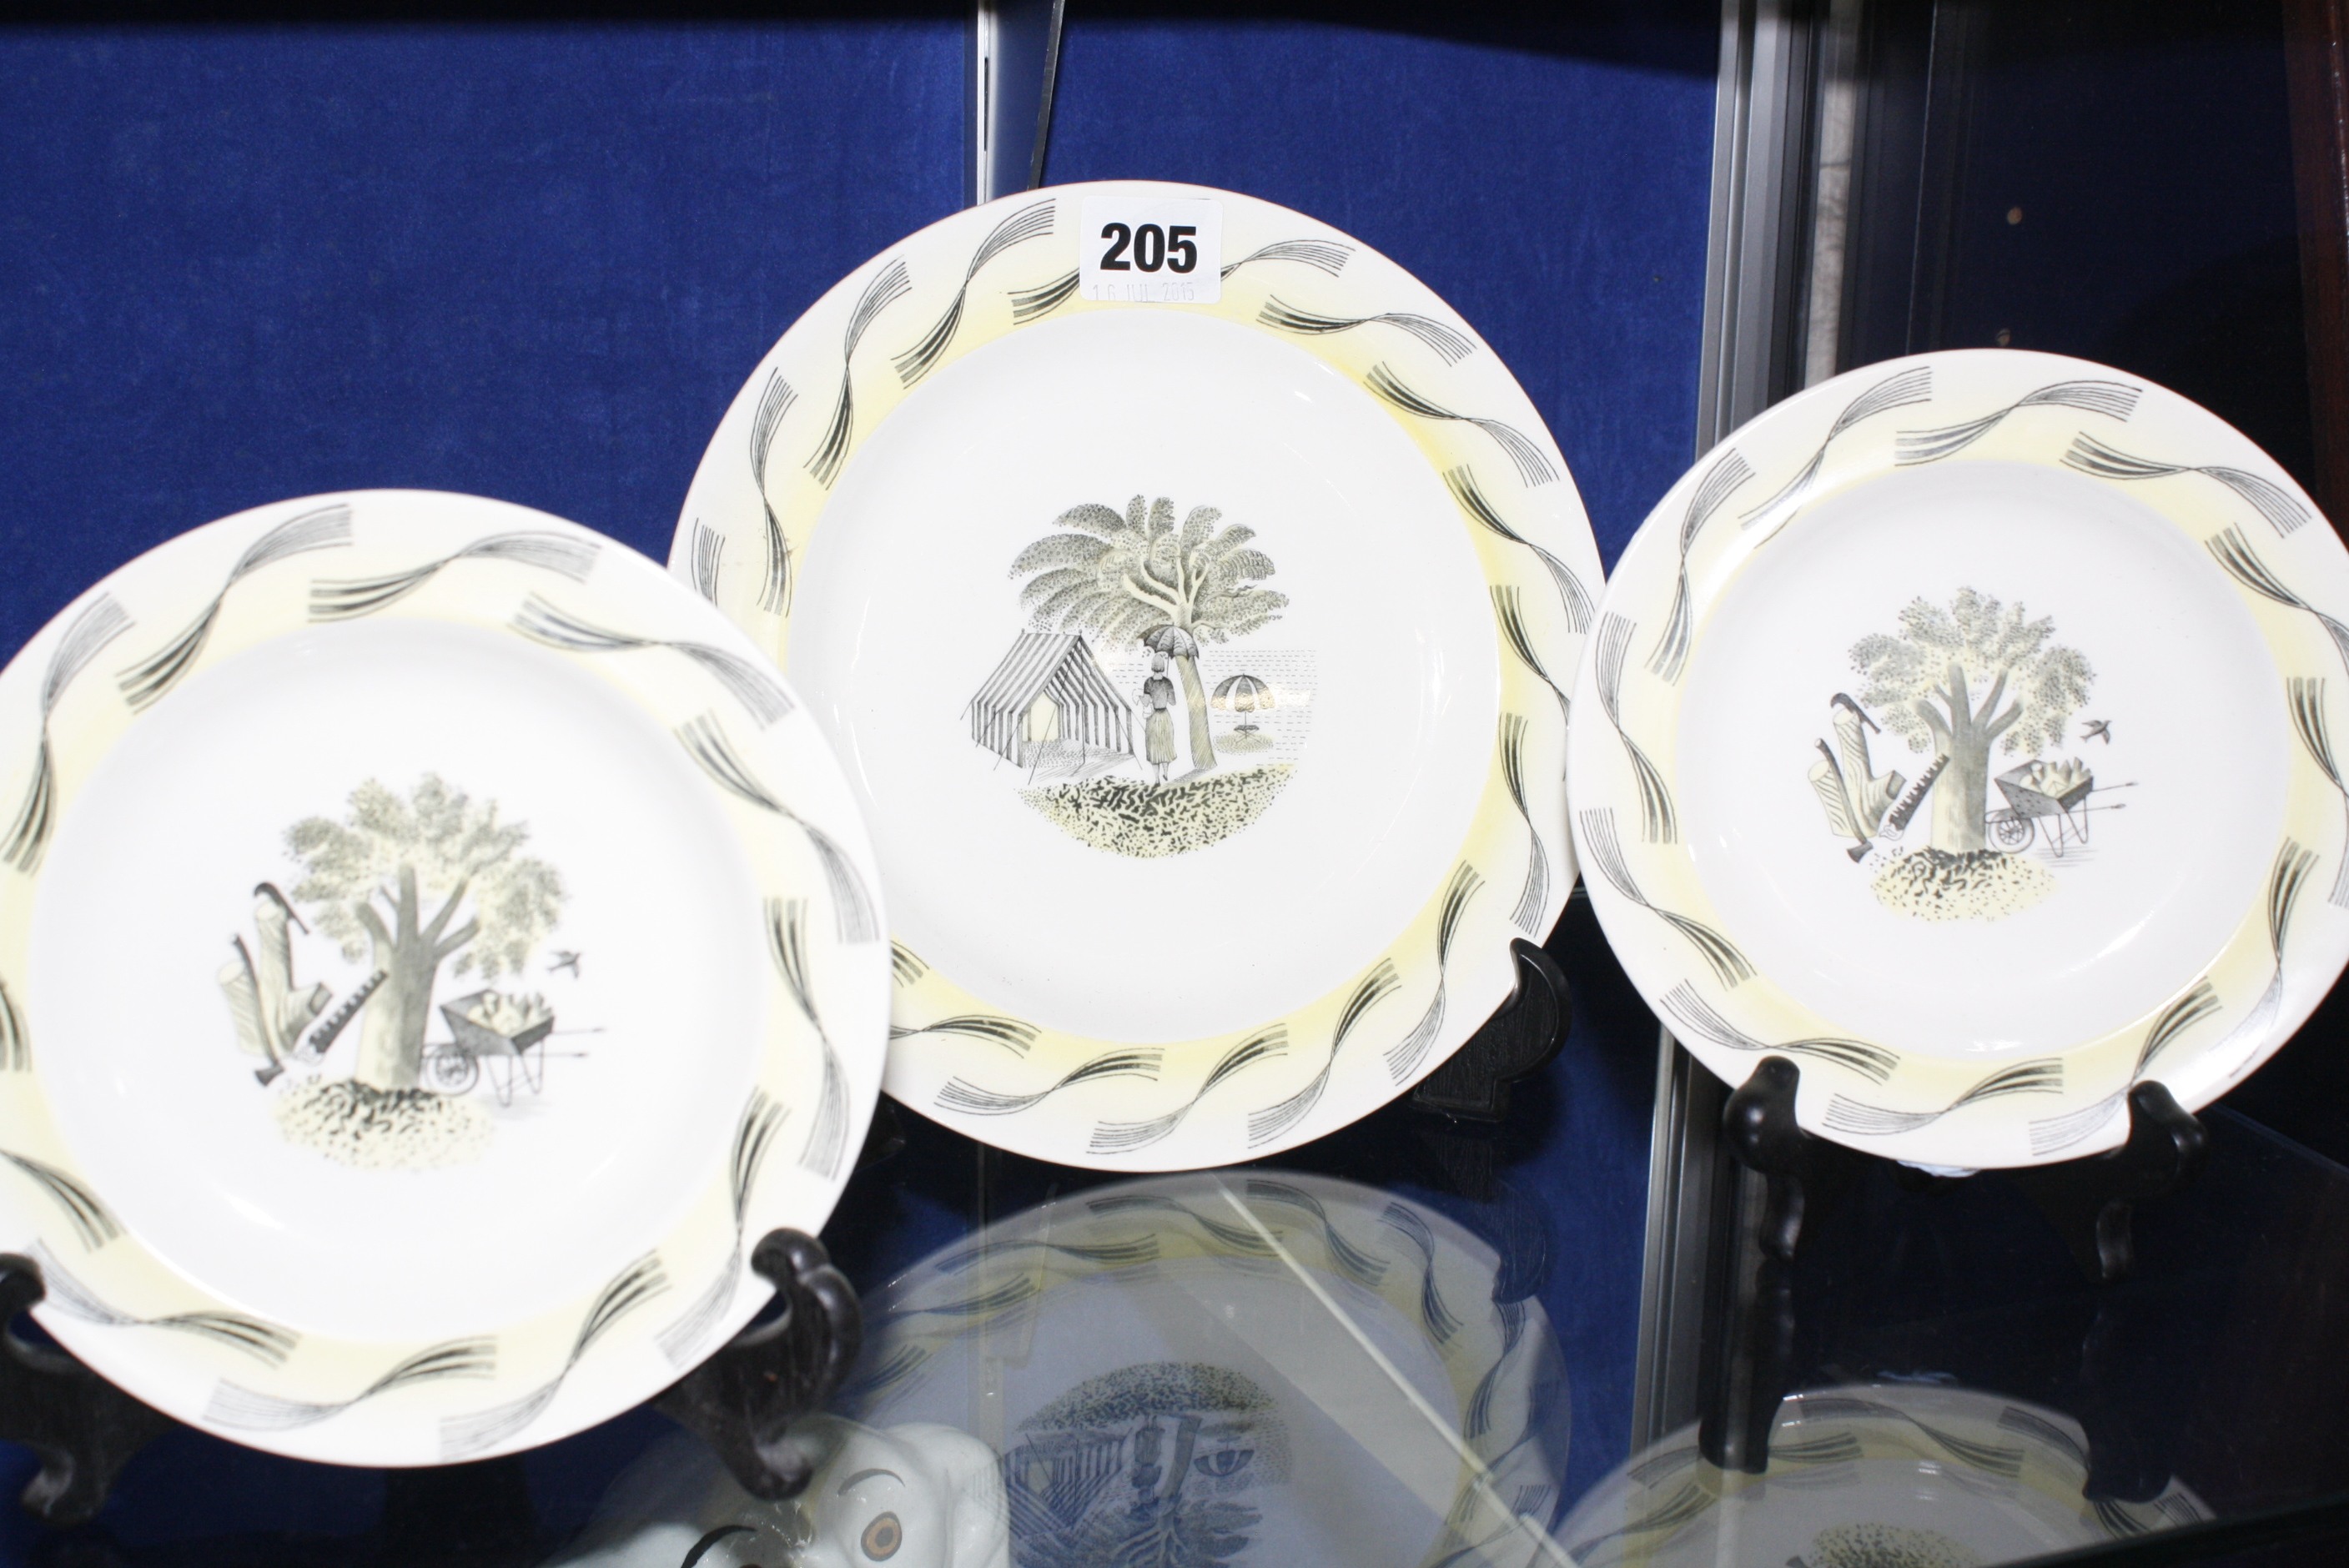 A set of three Wedgwood Garden pattern plates designed by Eric Ravilious £80-120